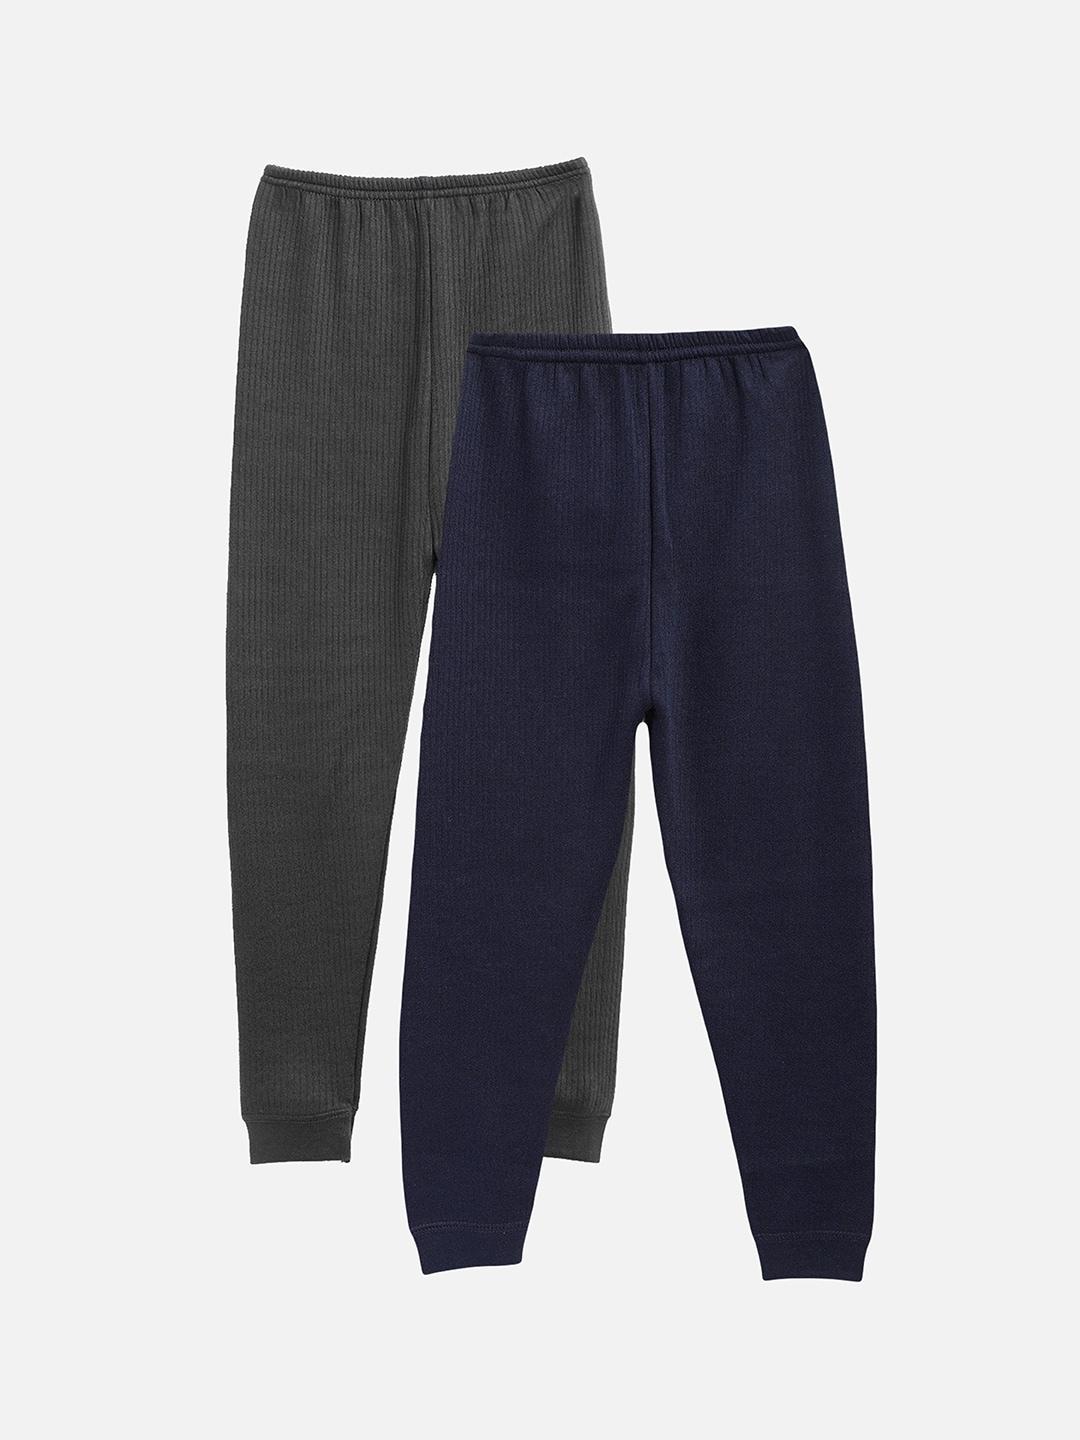 kanvin-boys-pack-of-2-navy-blue-and-charcoal-black-solid-thermal-bottoms